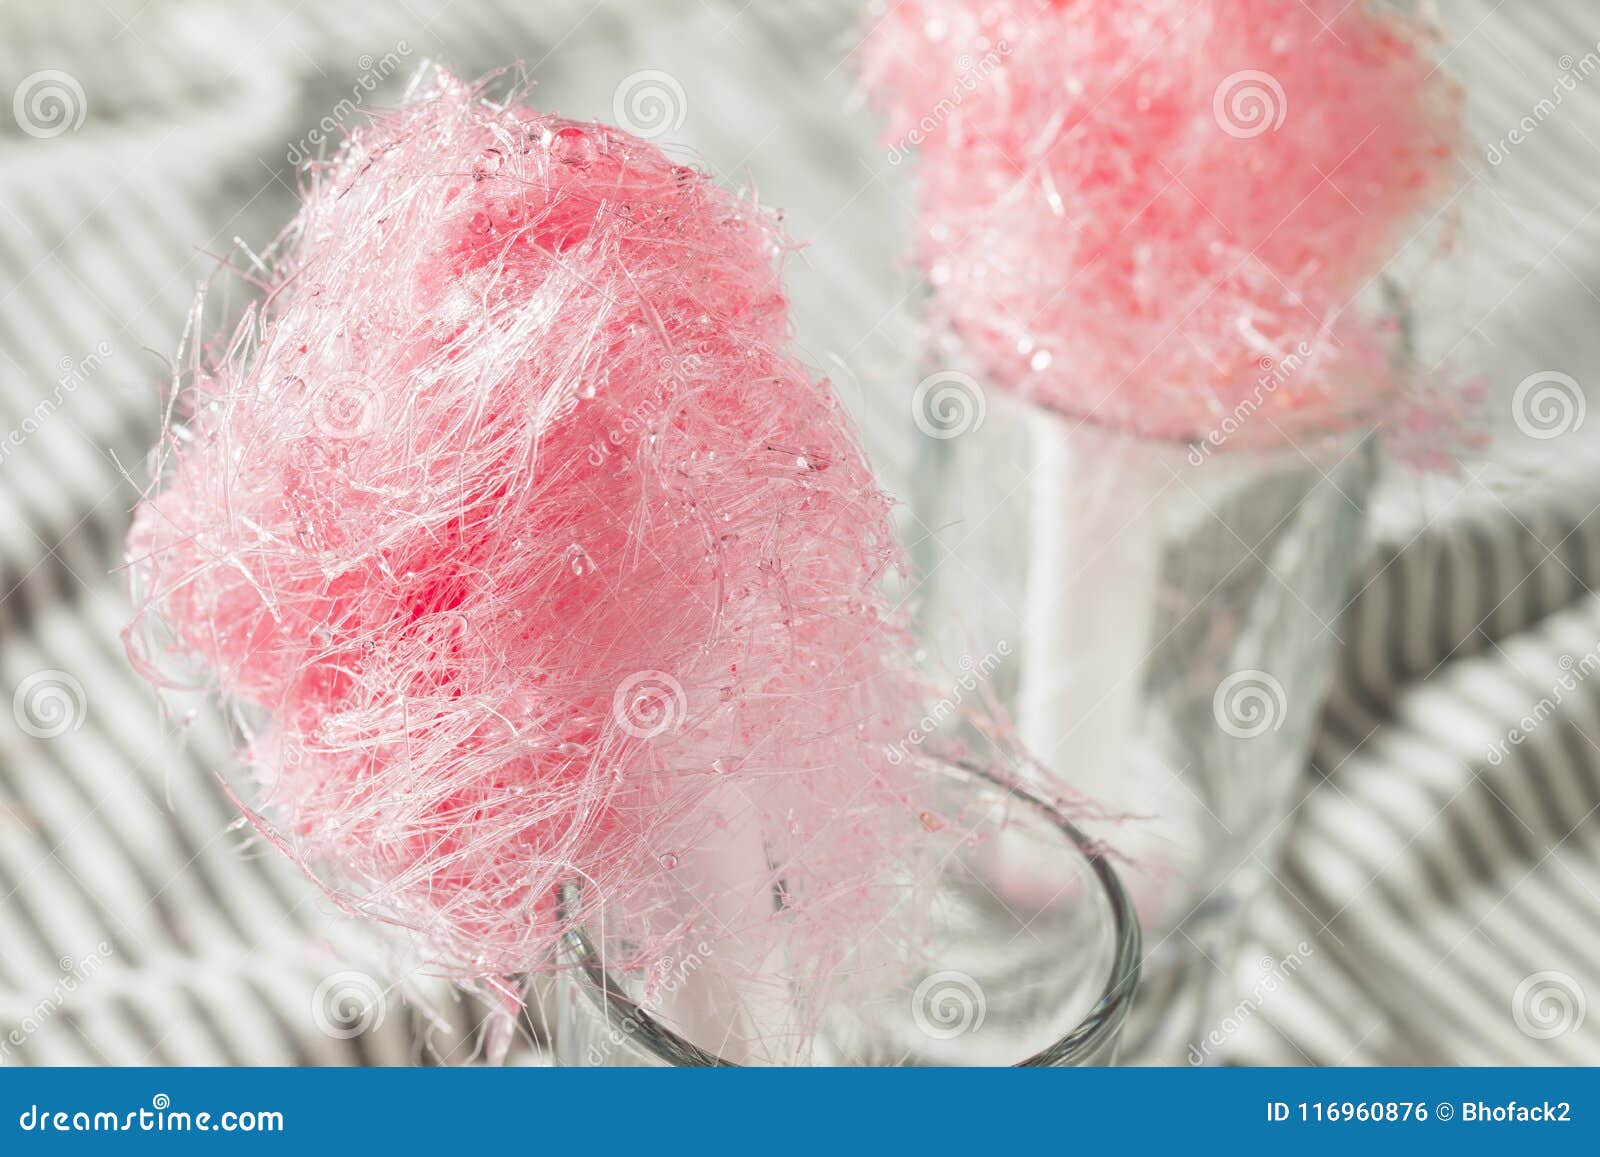 Sugary Pink Homemade Cotton Candy Floss Stock Photo Image Of Sticky Soft